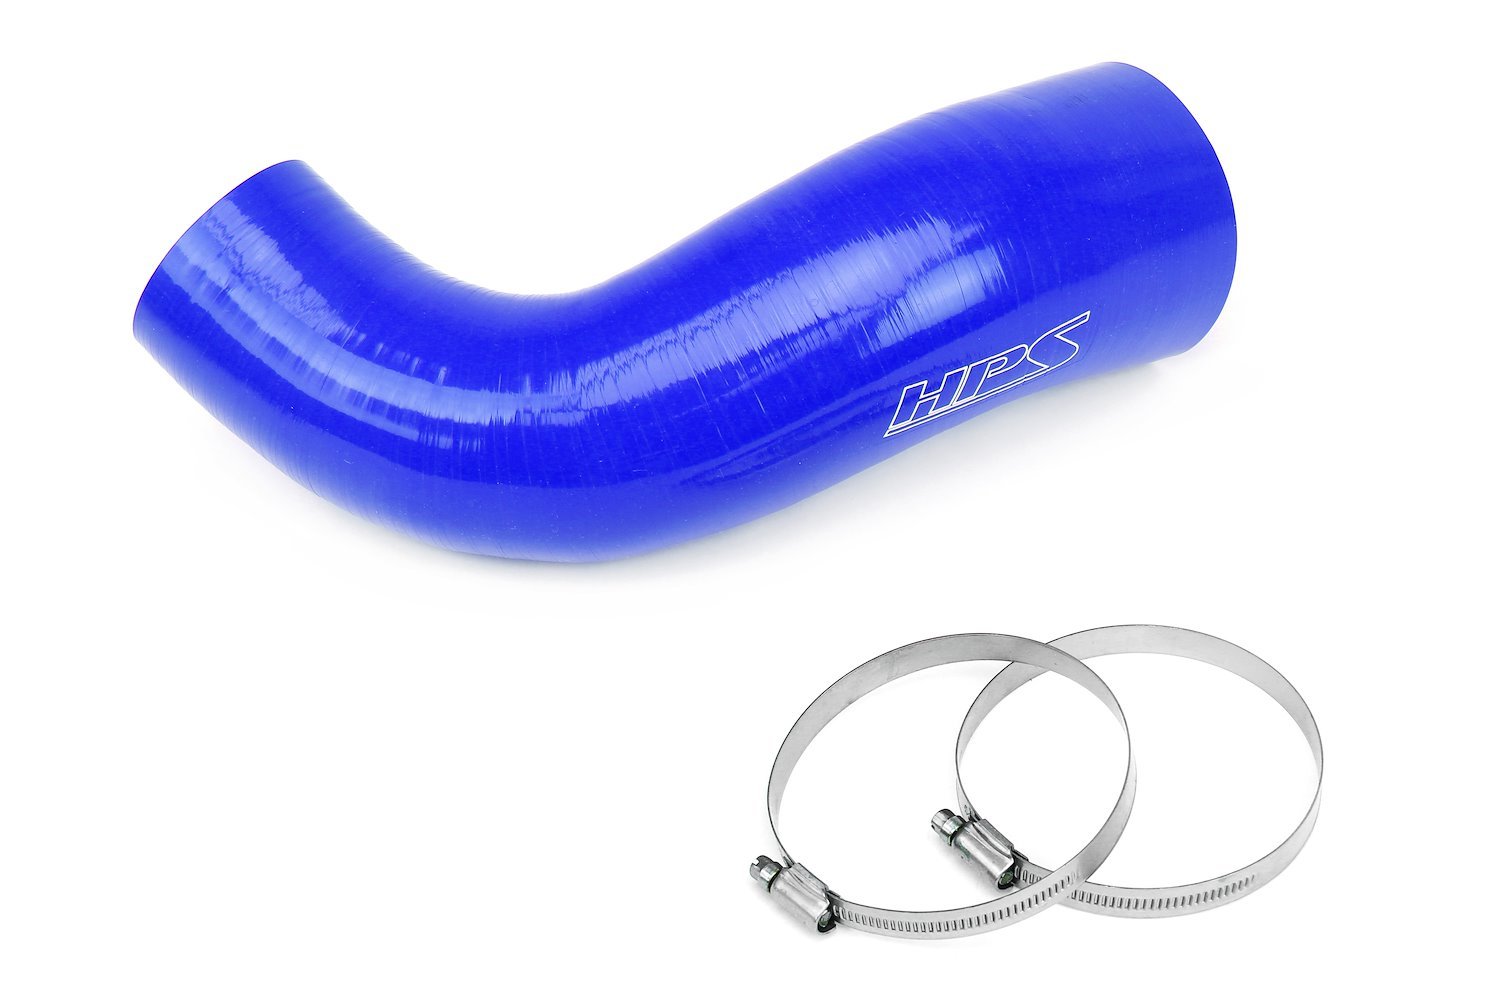 57-1922-BLUE Silicone Air Intake Kit, Replaces Stock Restrictive Air Intake, Improve Throttle Response, No Heat Soak